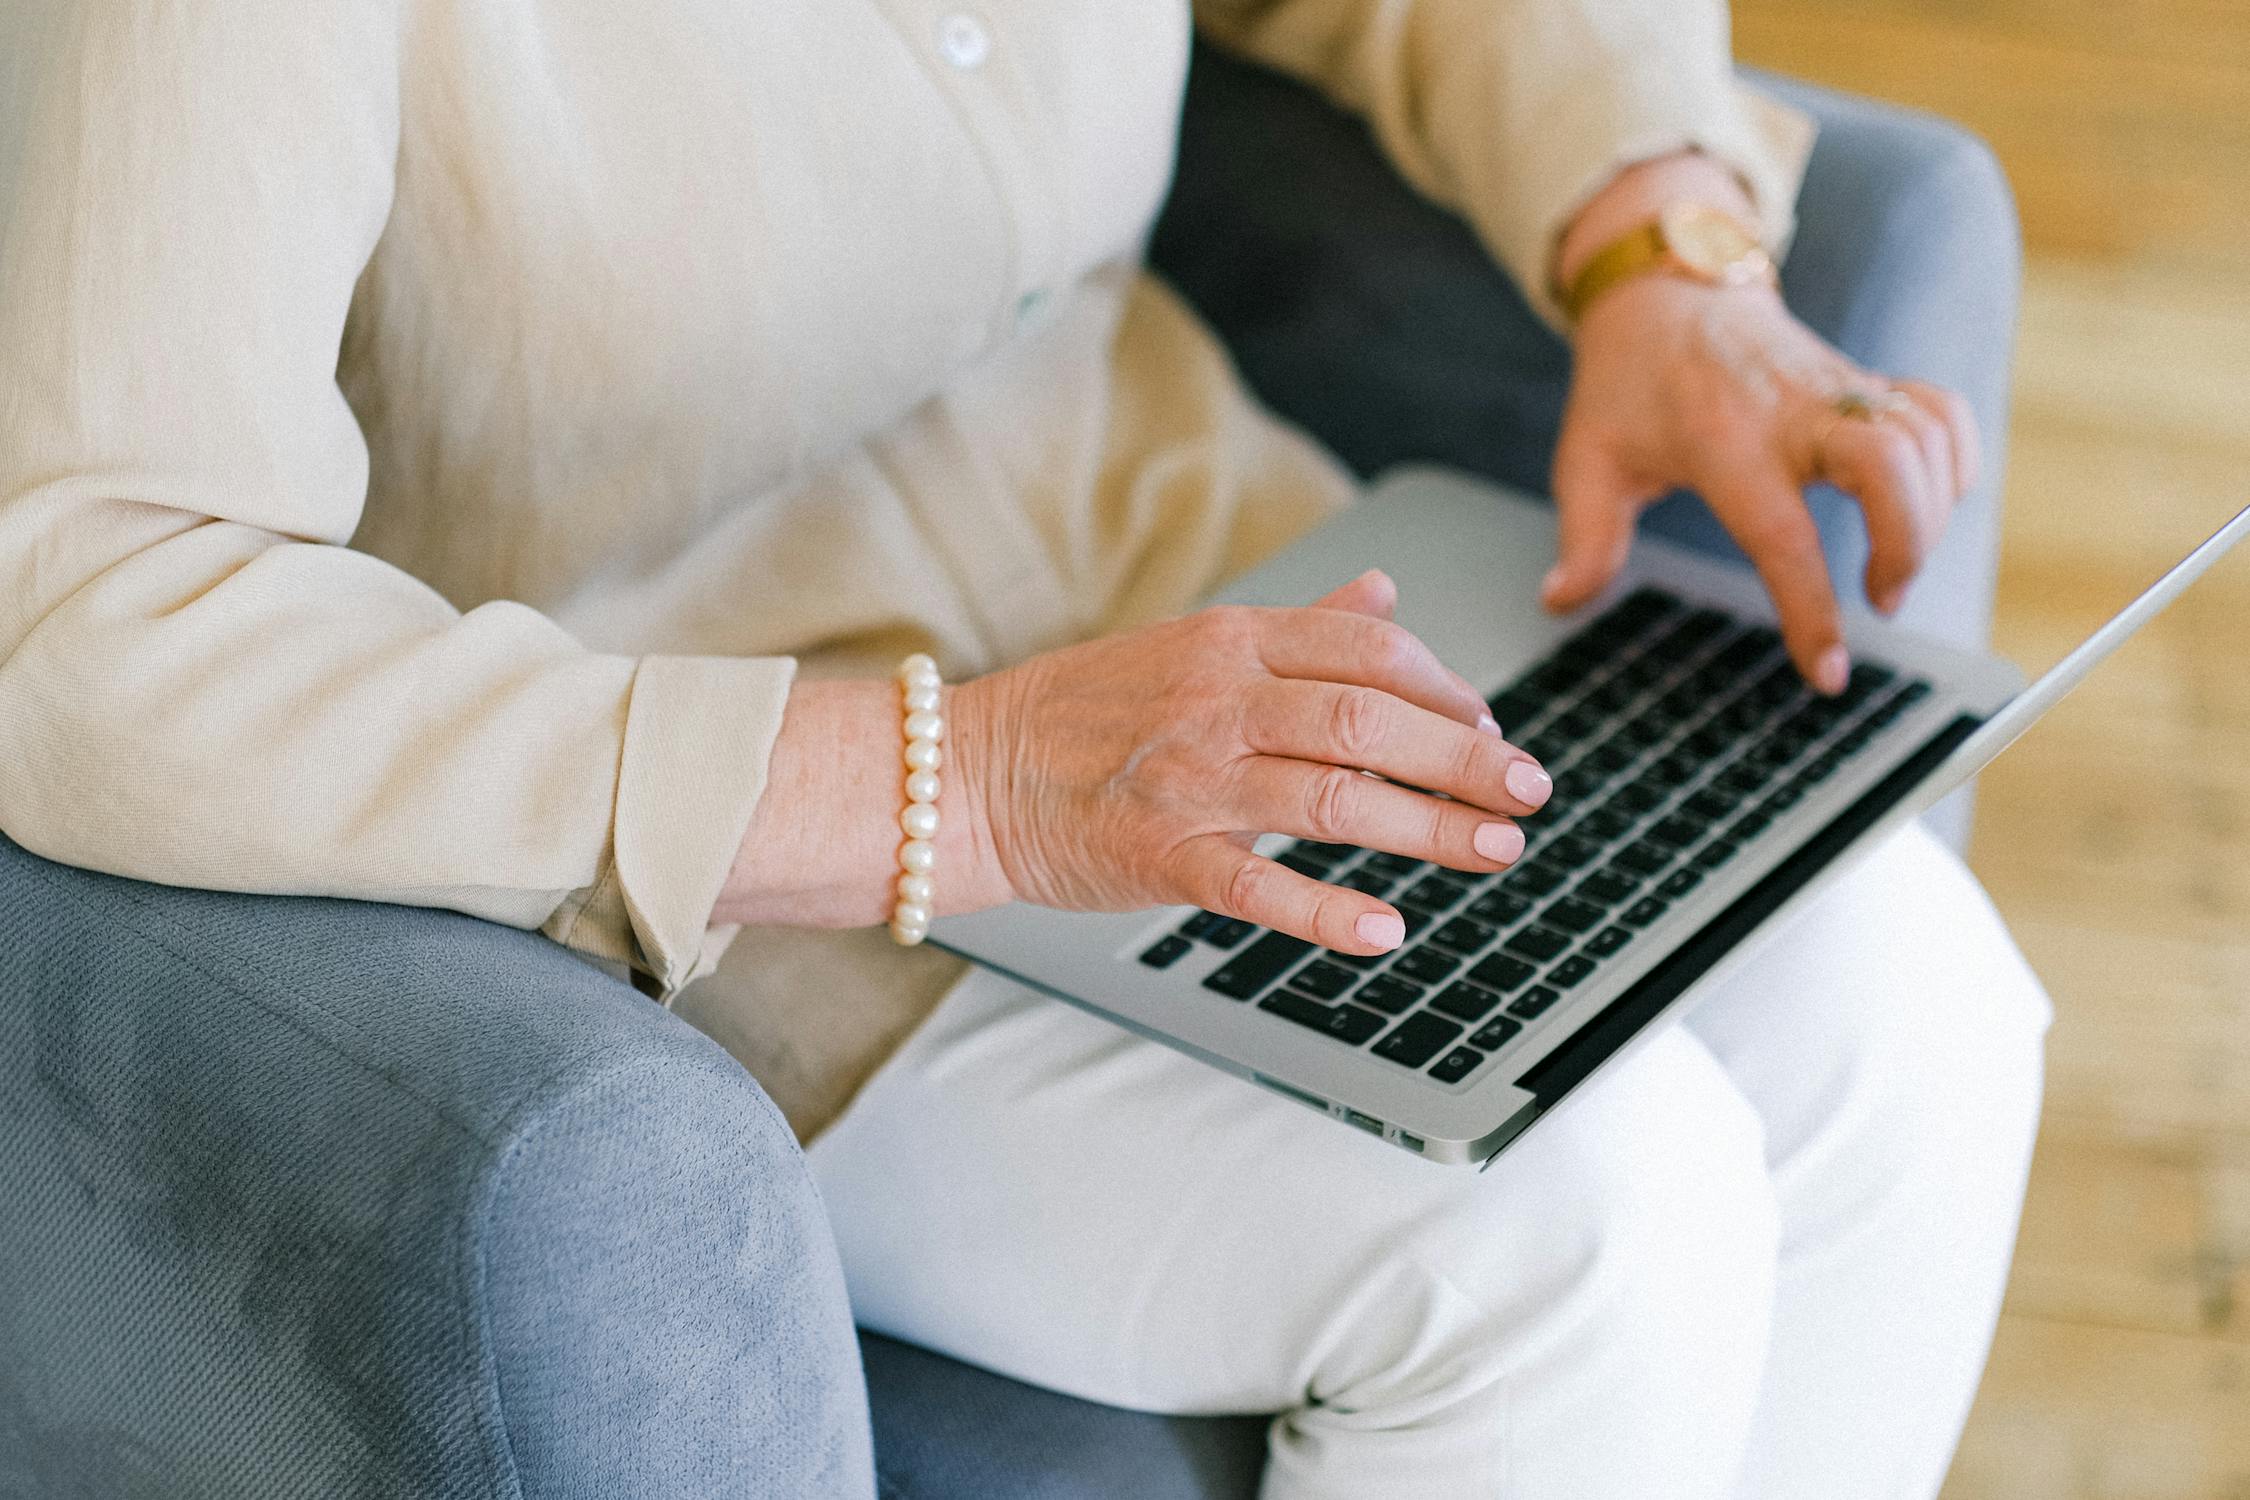 5 Steps to Successfully Start an Online Business in Retirement